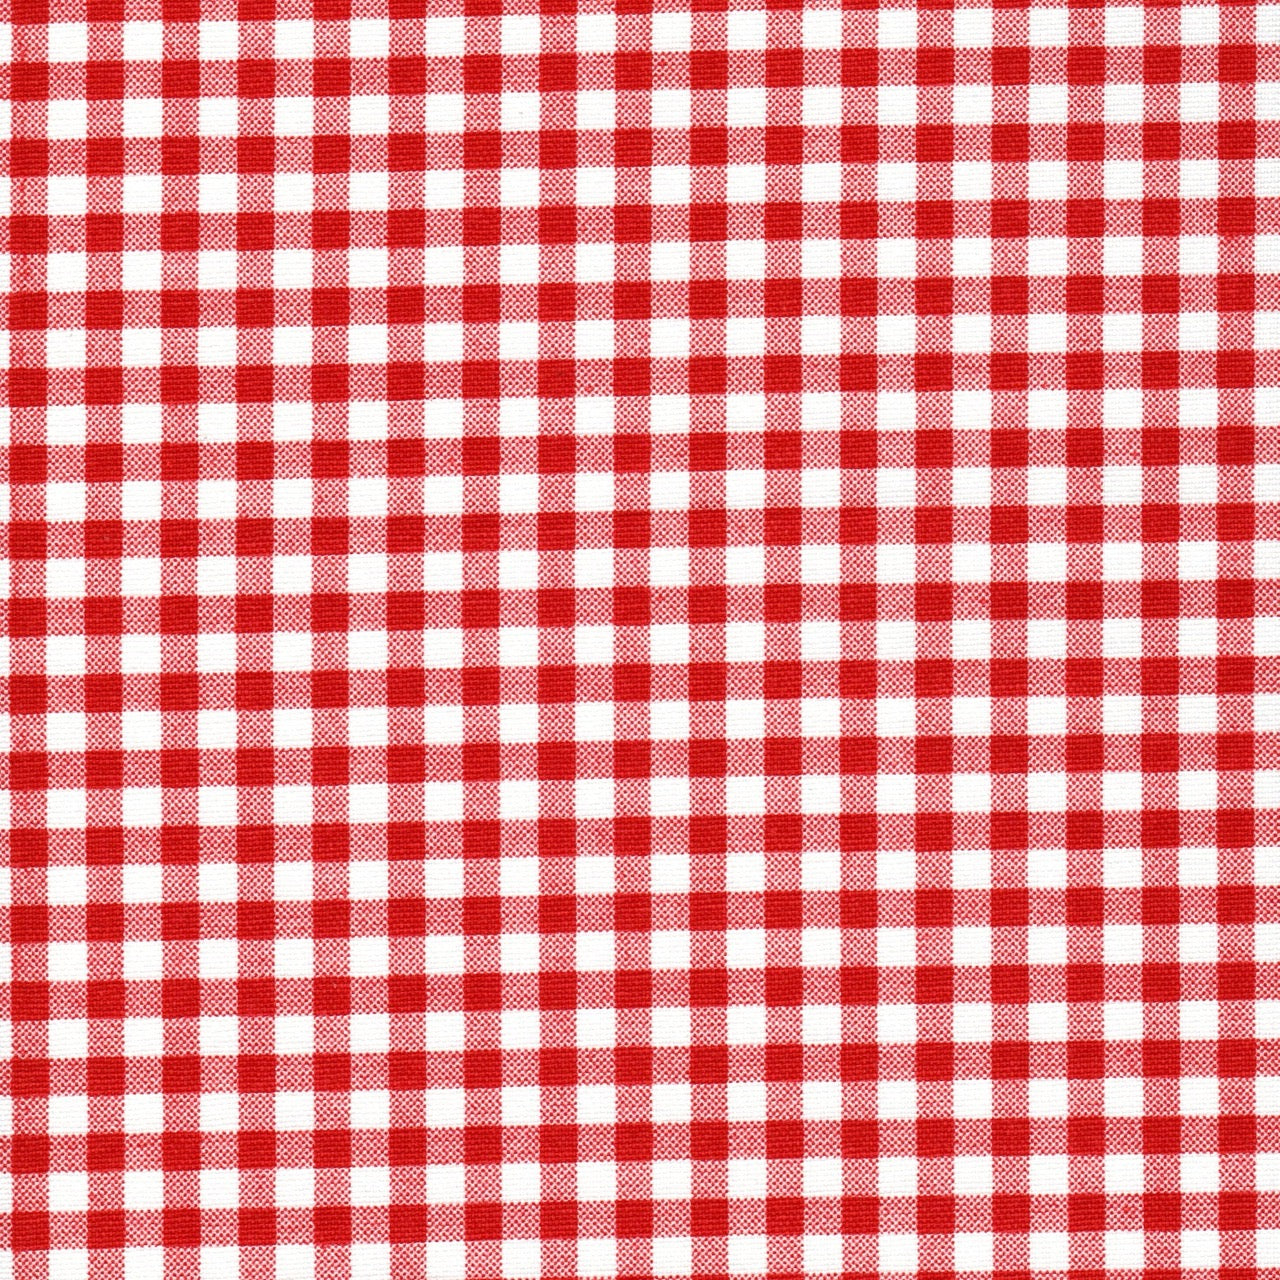 Gathered Crib Skirt in Lipstick Red Large Gingham Check on White Plaid